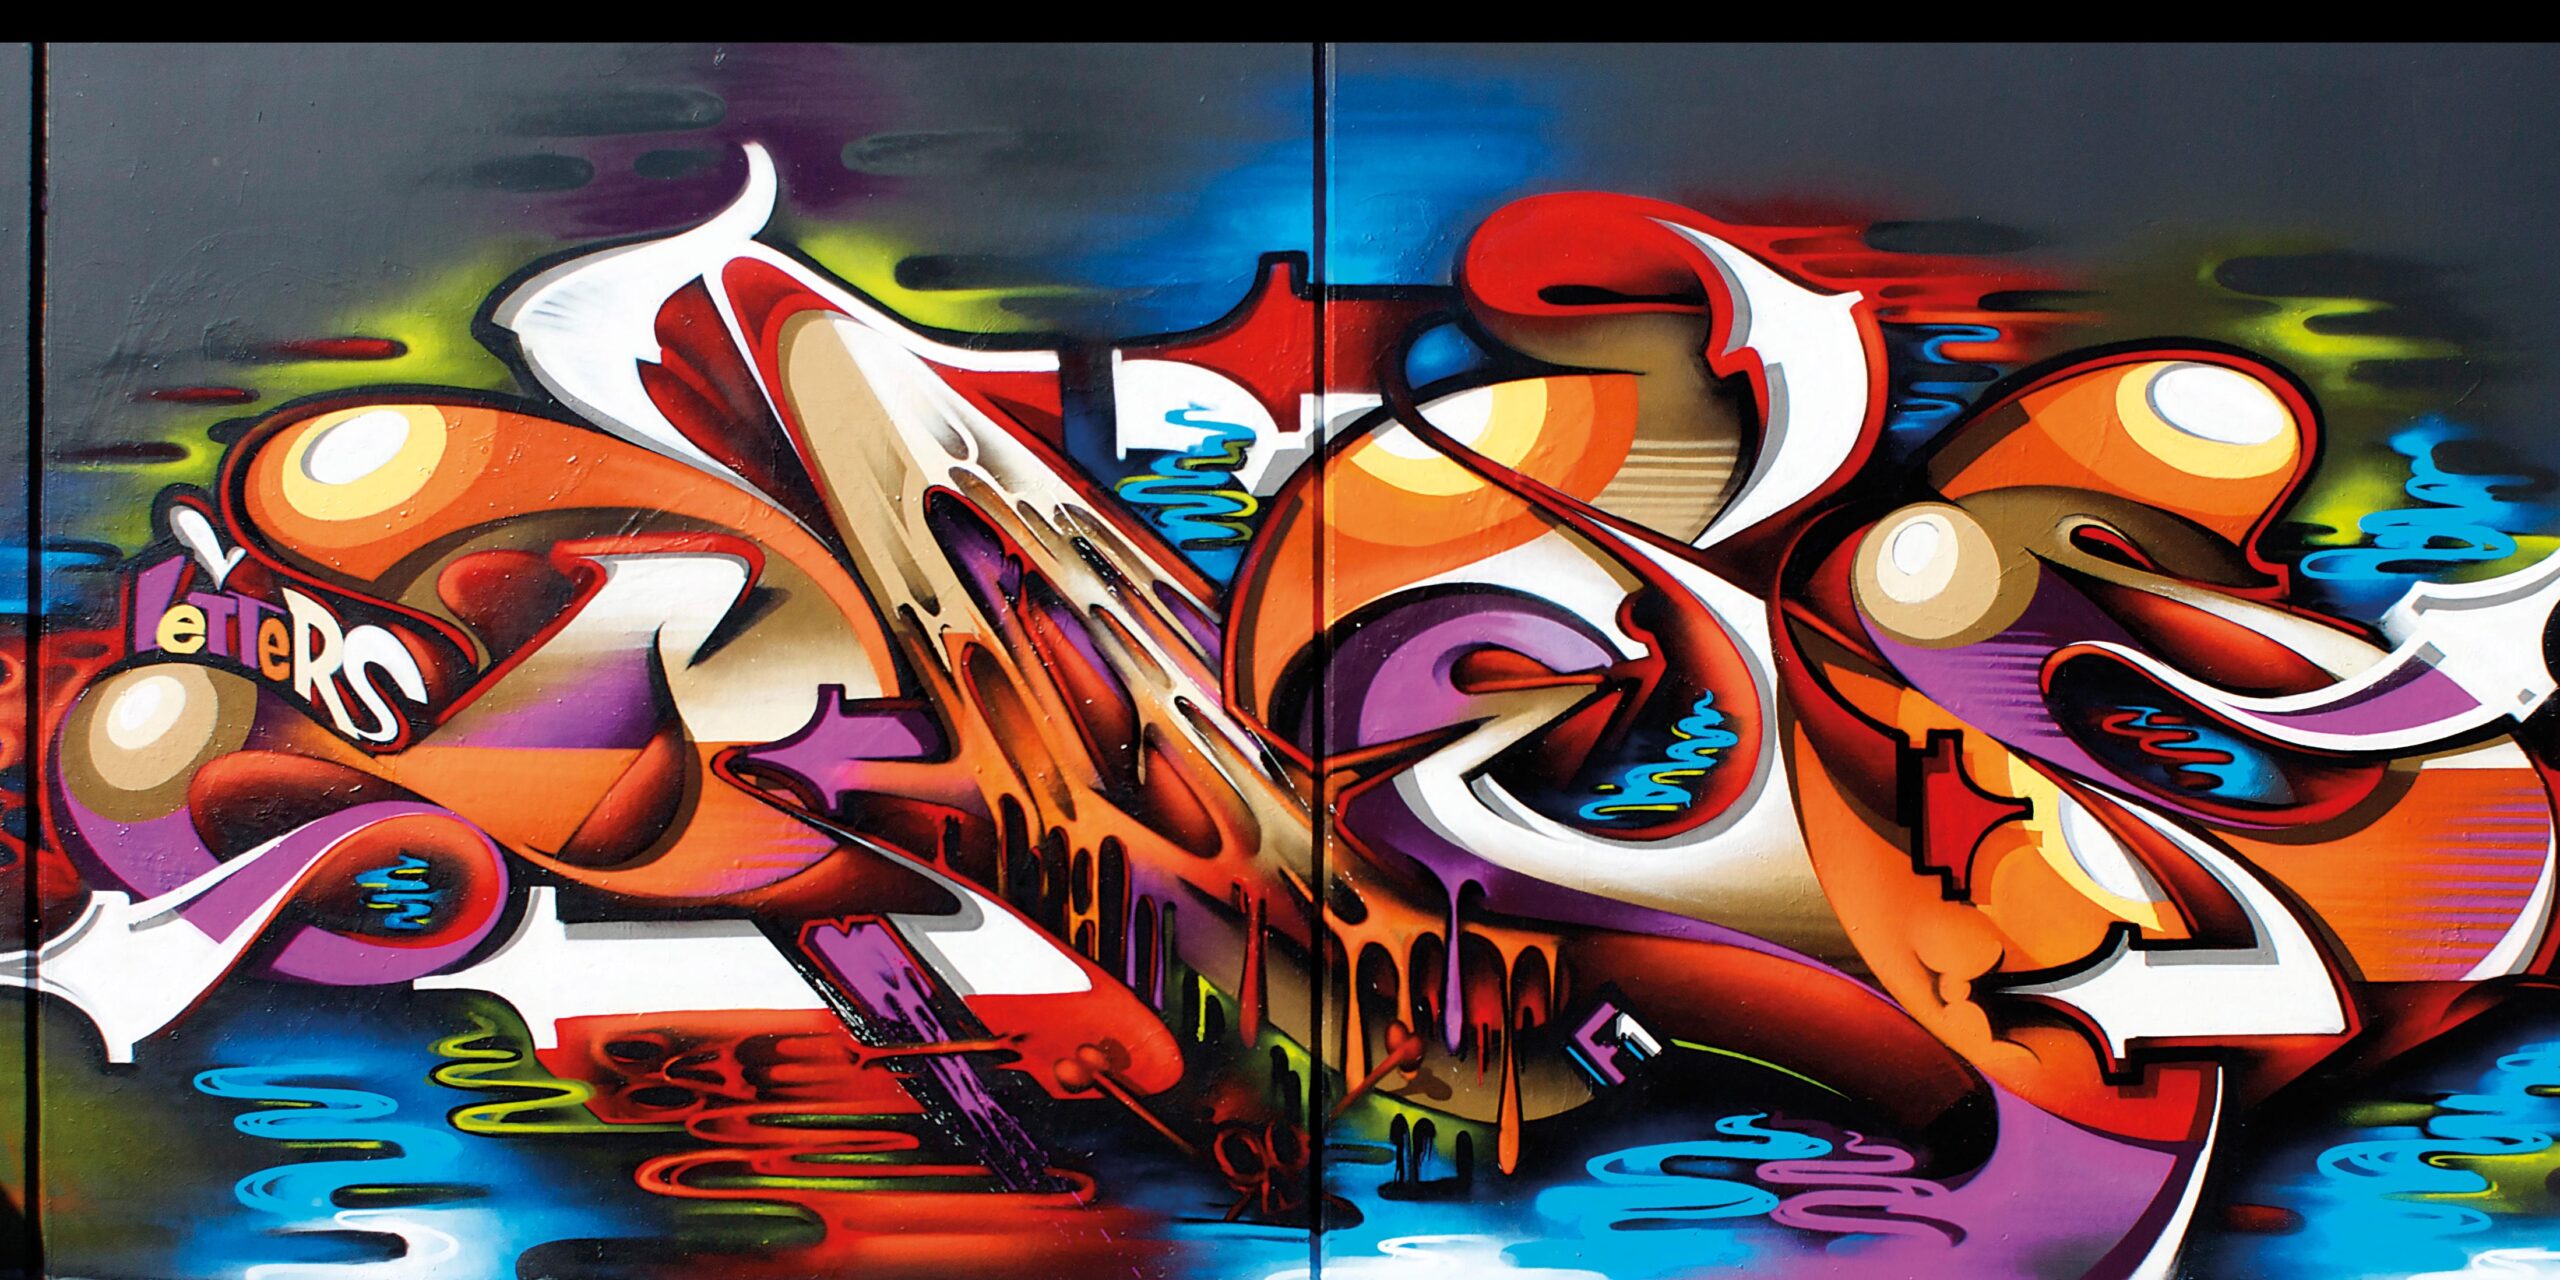 A work by Does - Melbourne, Australia_thumb